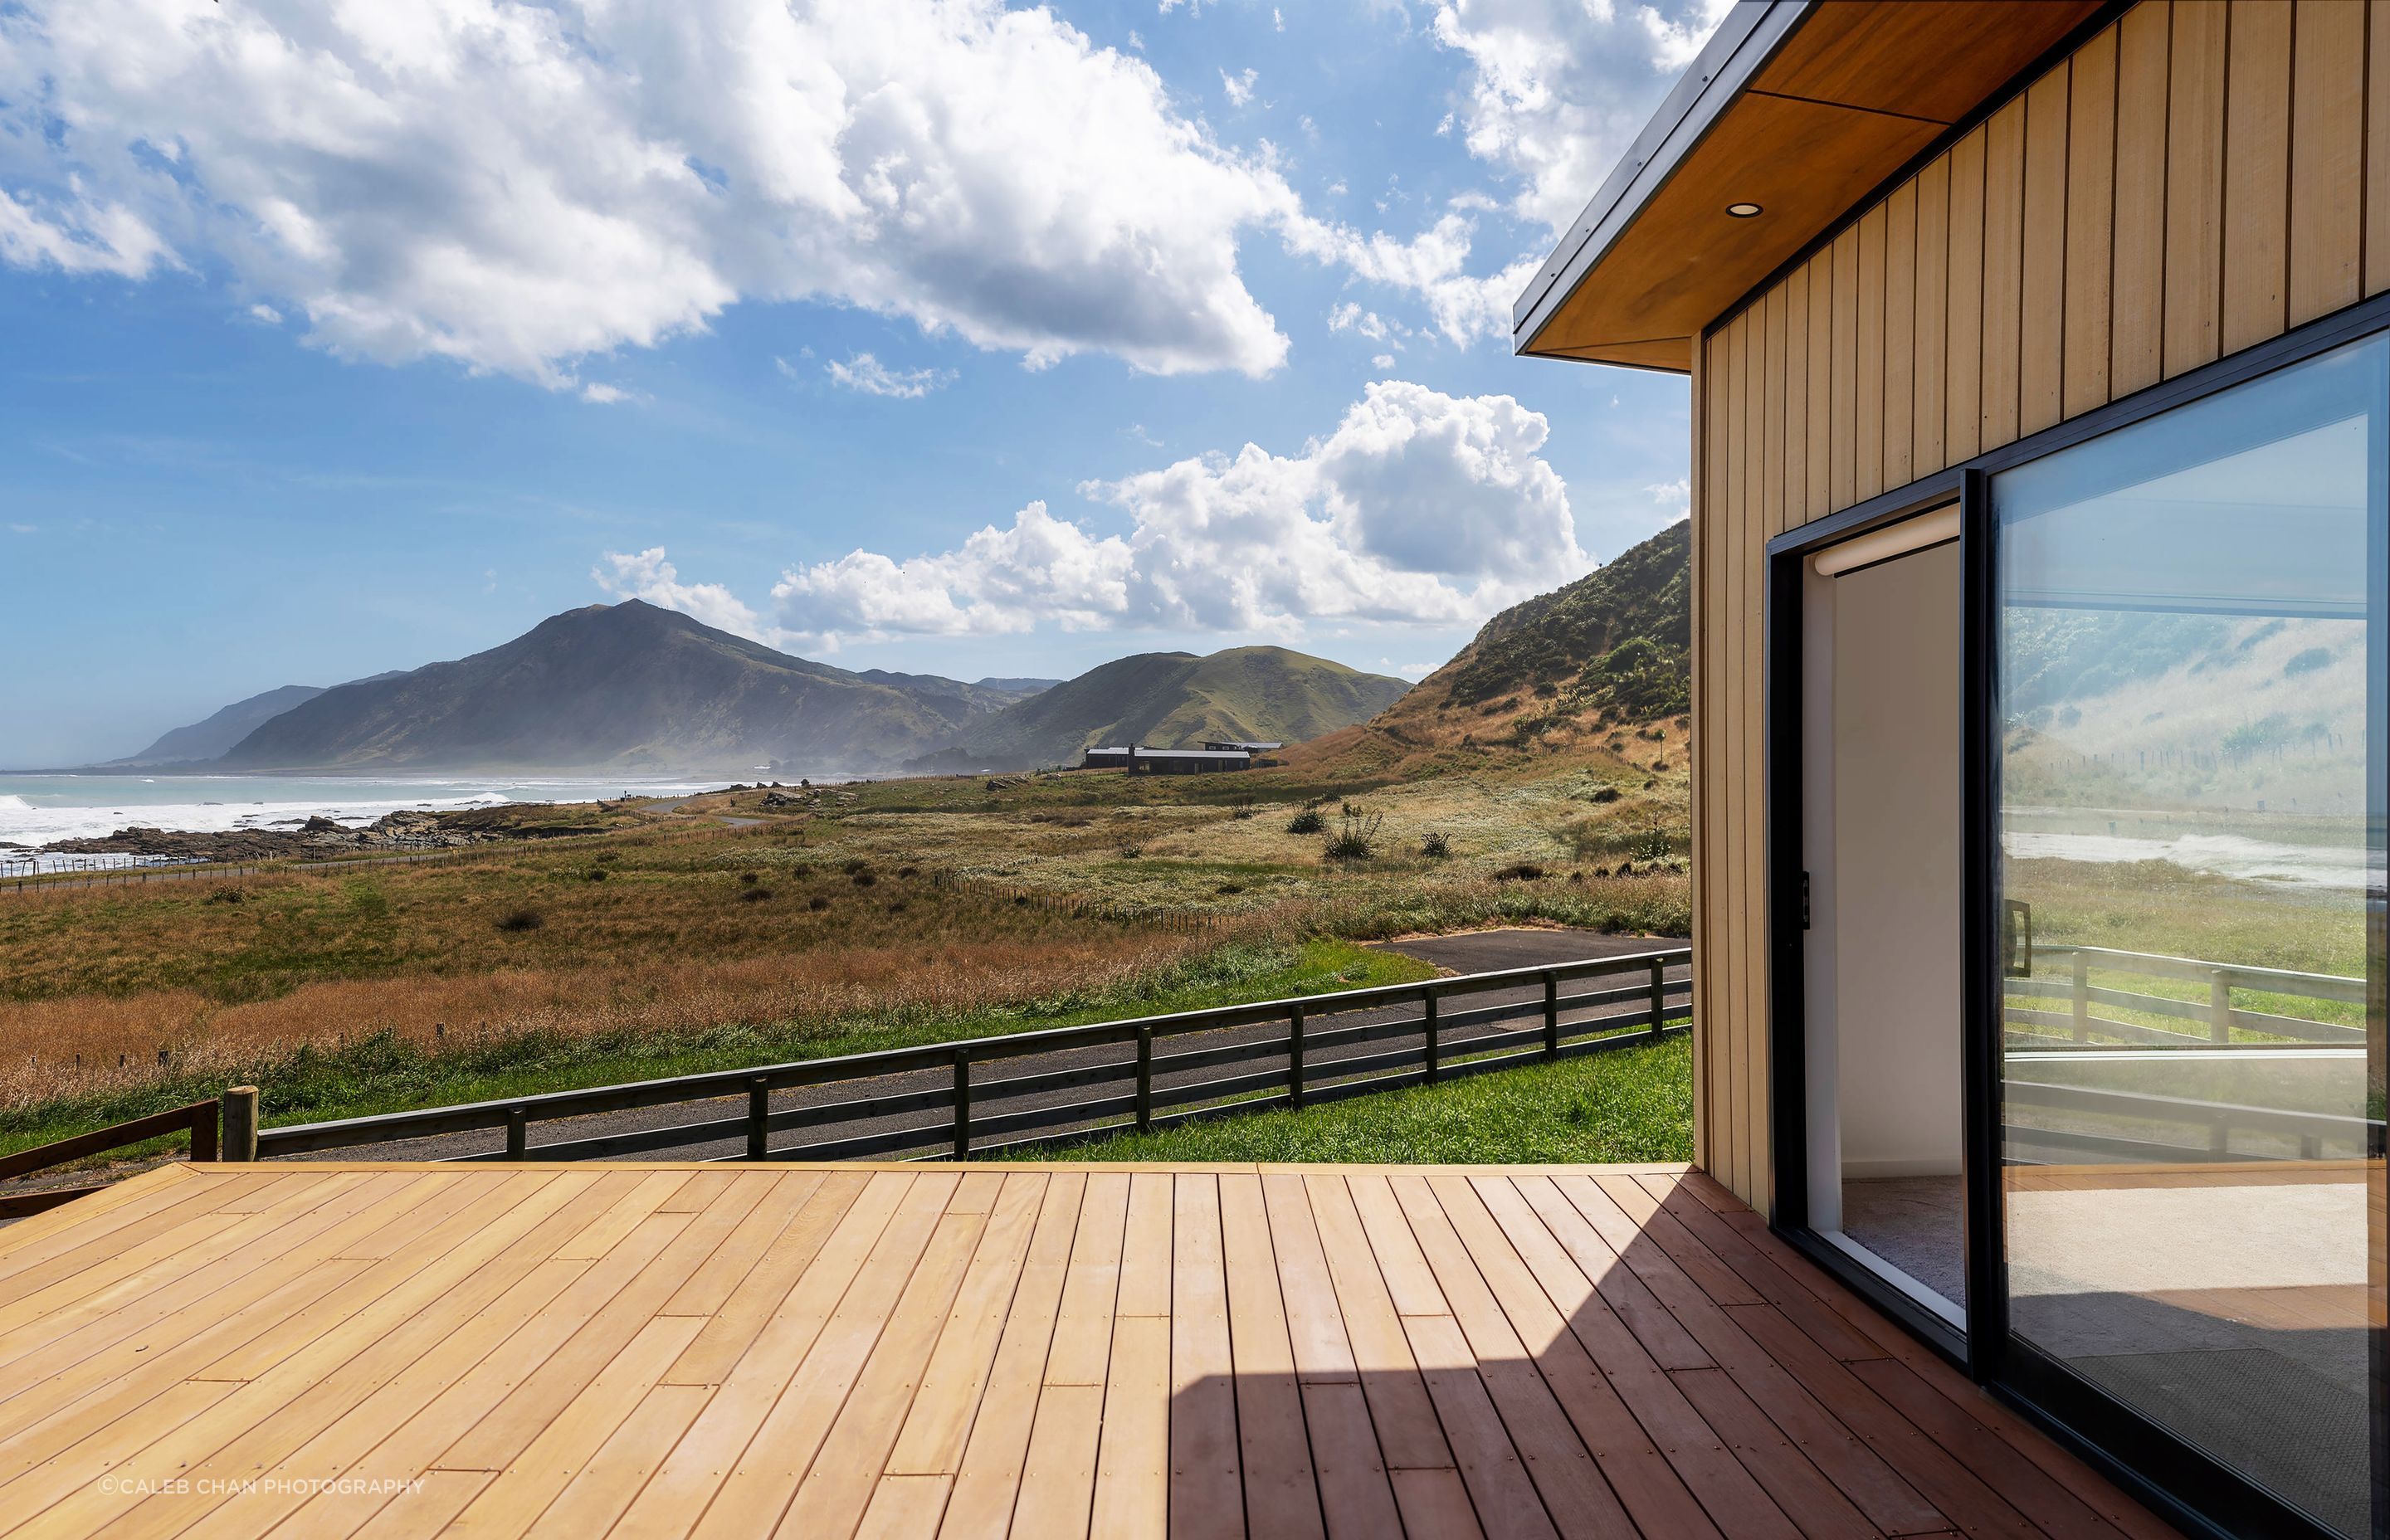 Hardwood decking and Abodo timber cladding frame this spectacular coastal view